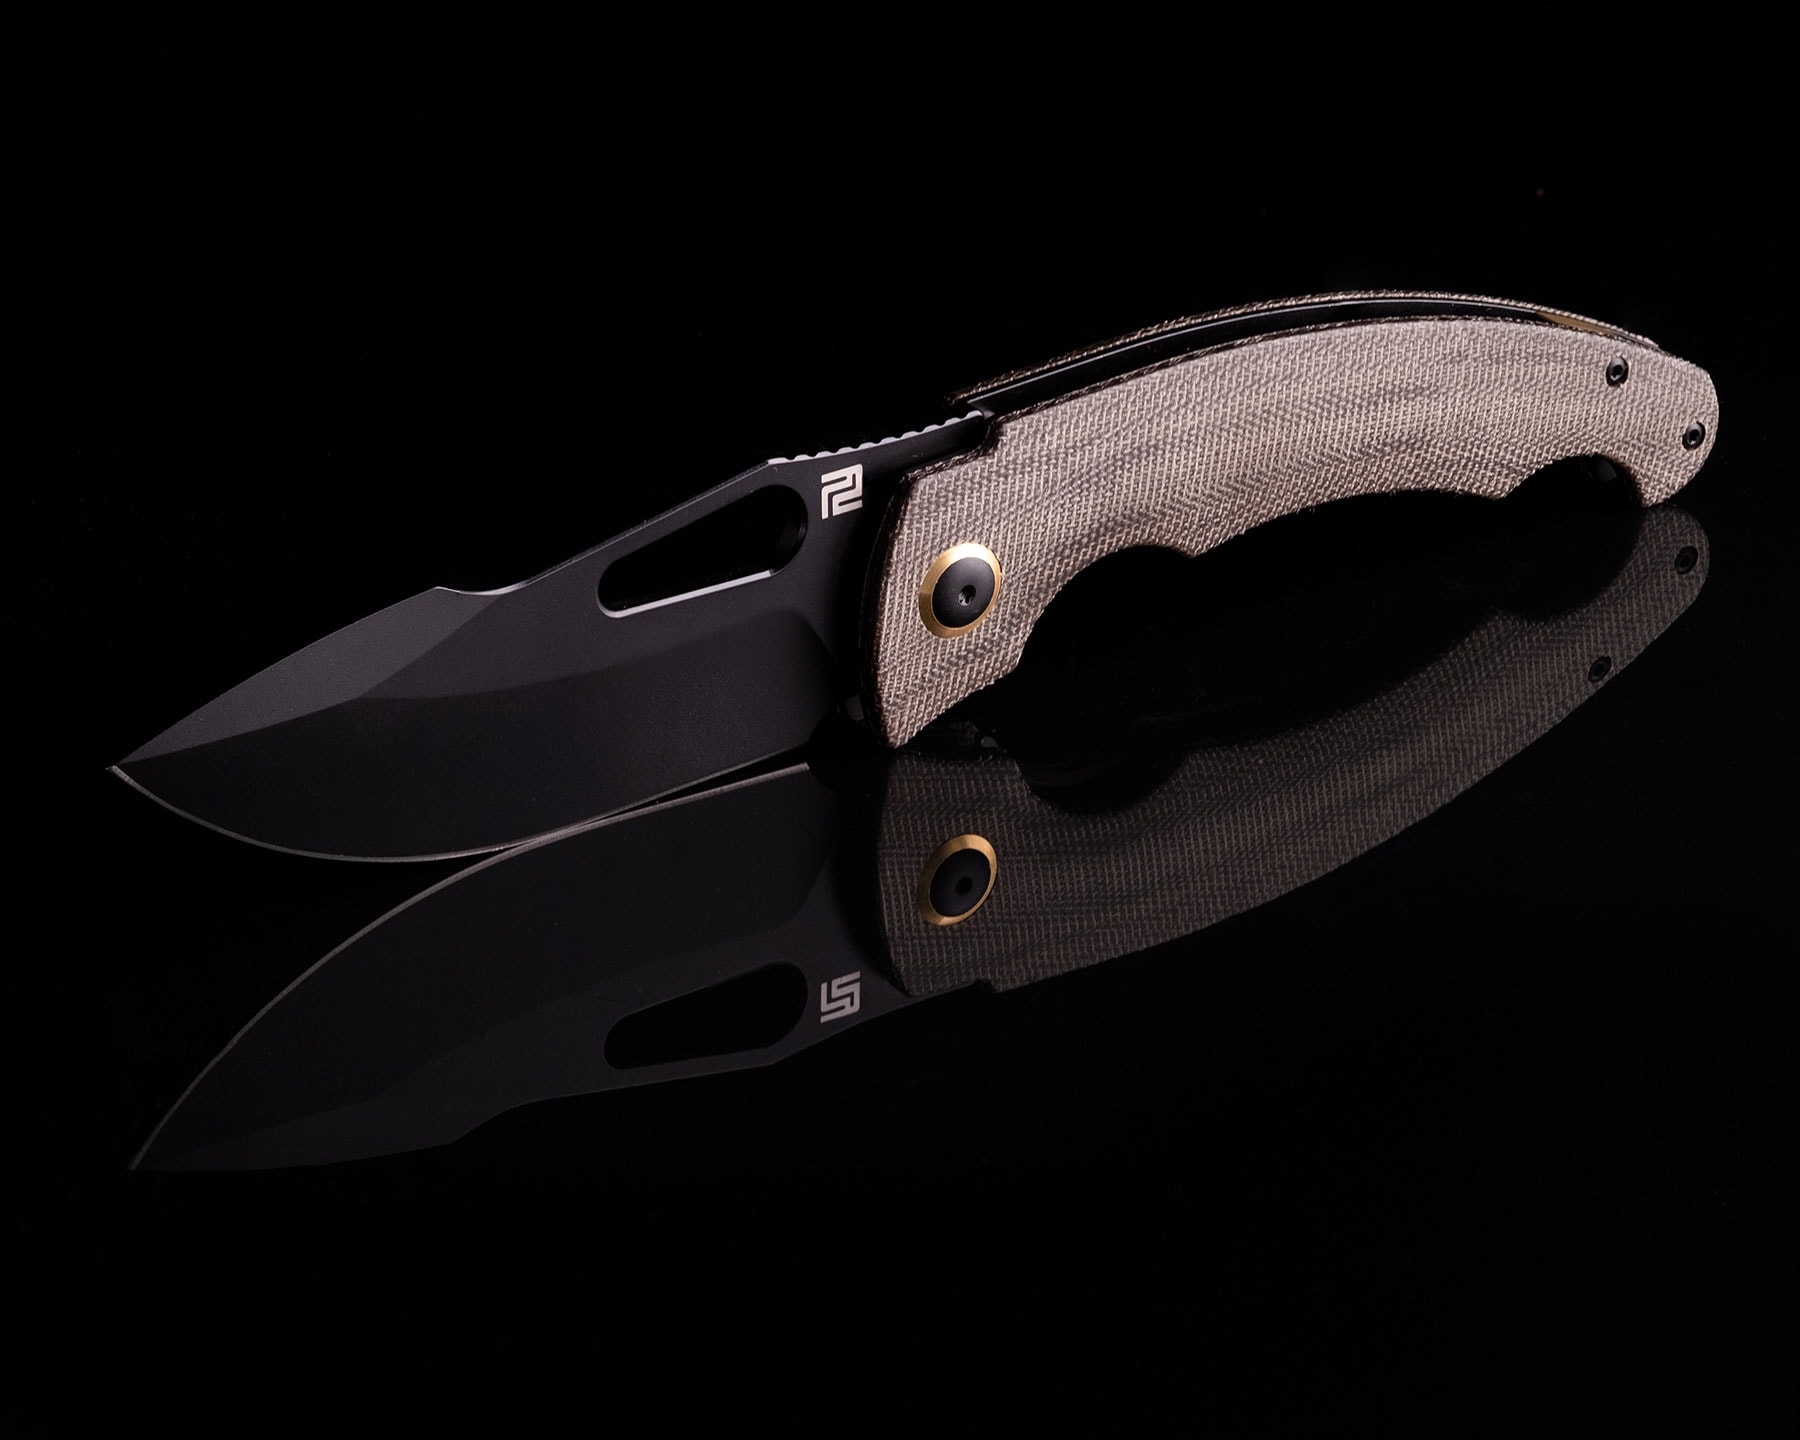 Best knife design to carry on a spaceship award. 